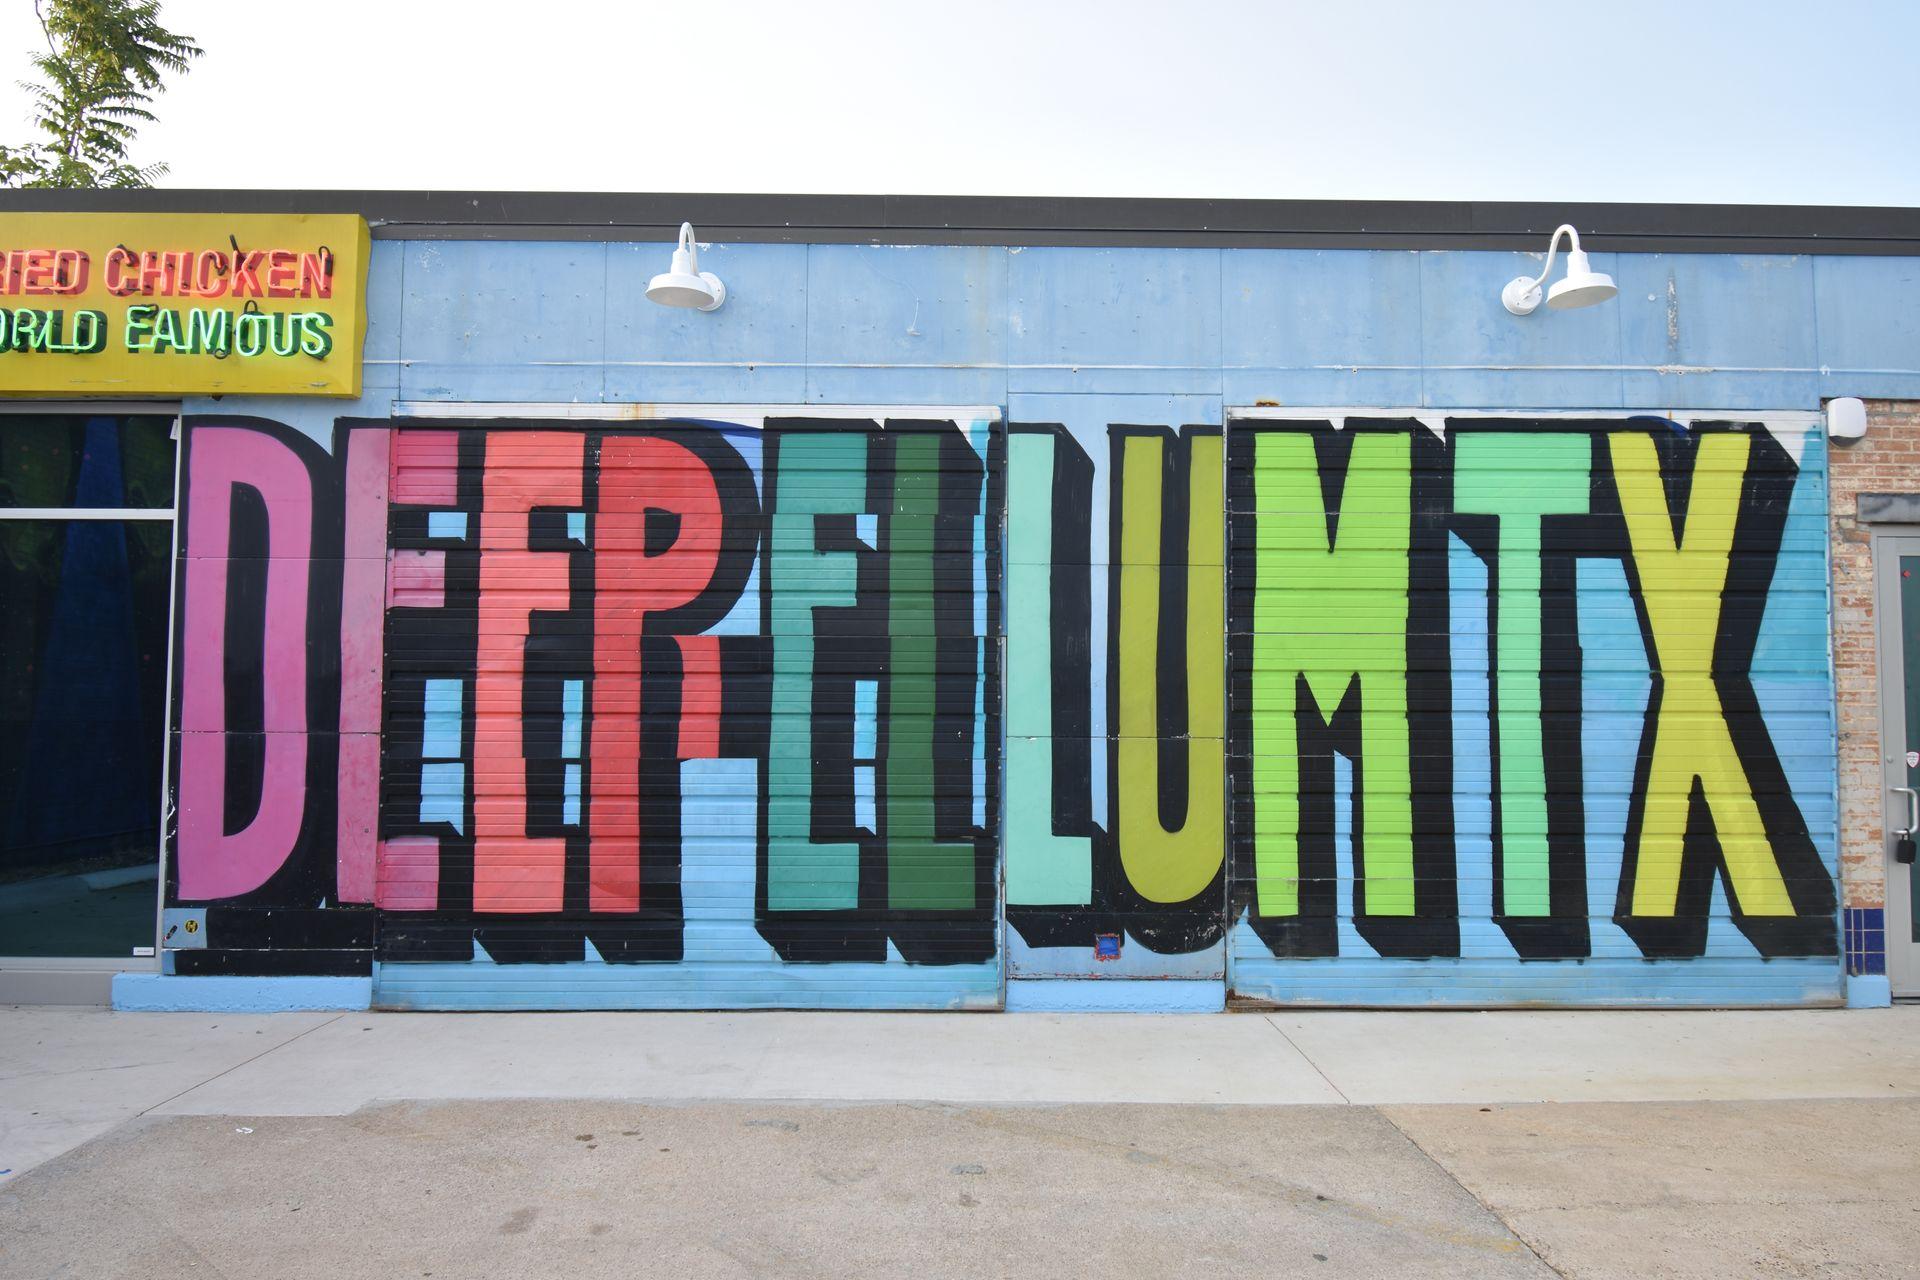 A colorful that reads "Deep Ellum TX" in huge, colorful letters.